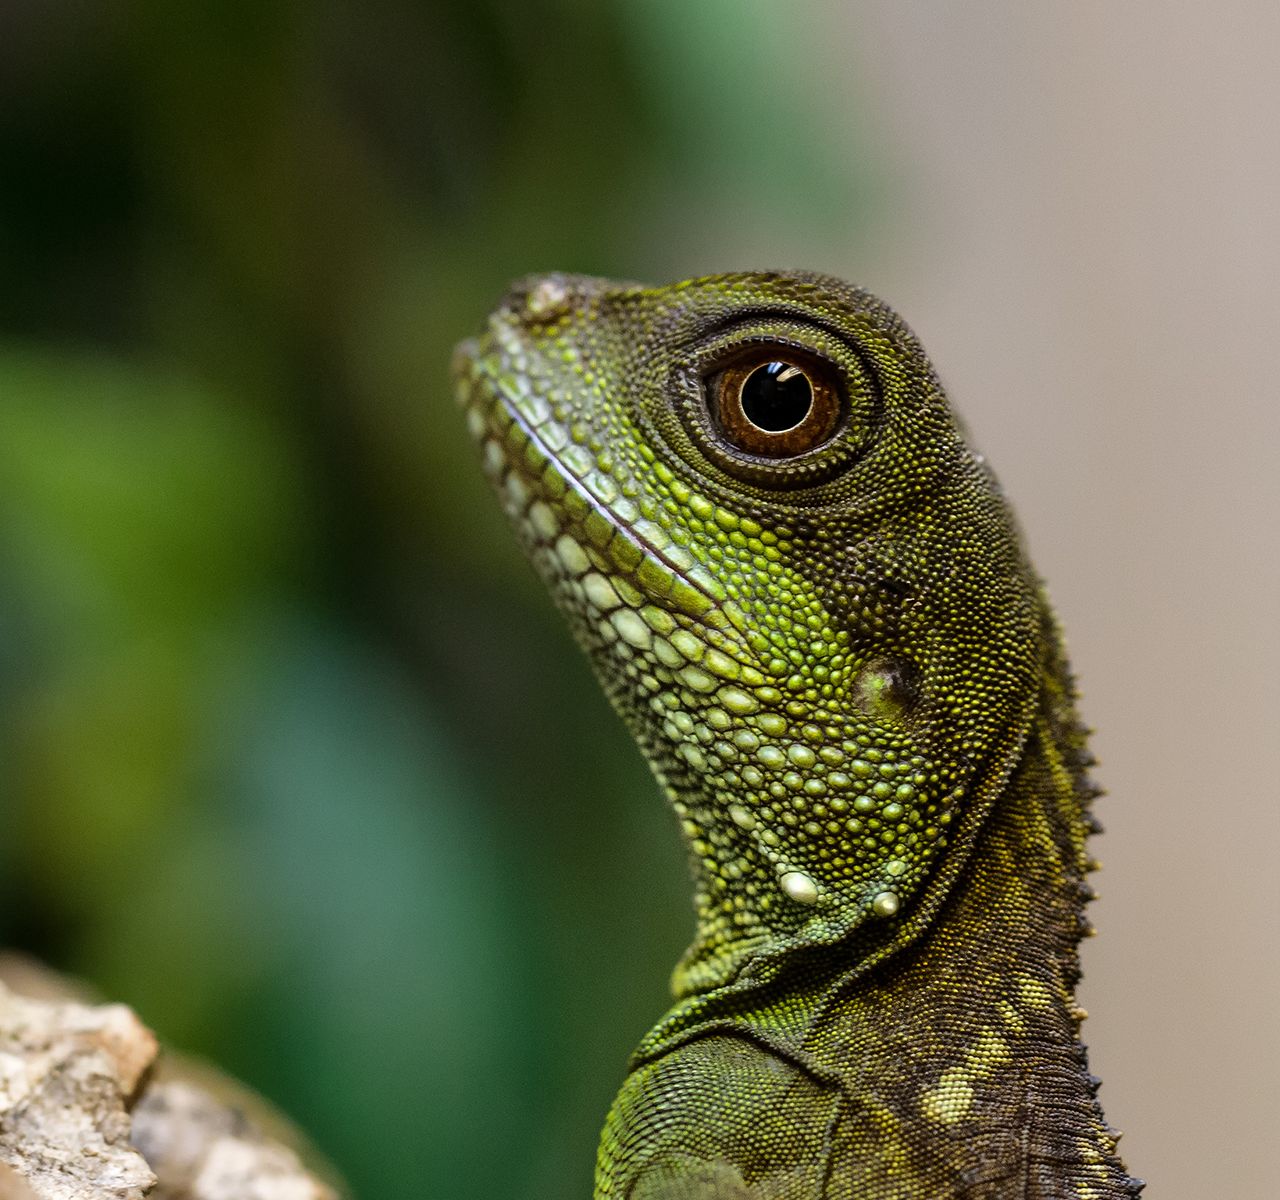 The Cool factor: 7 Reptiles to Chill with